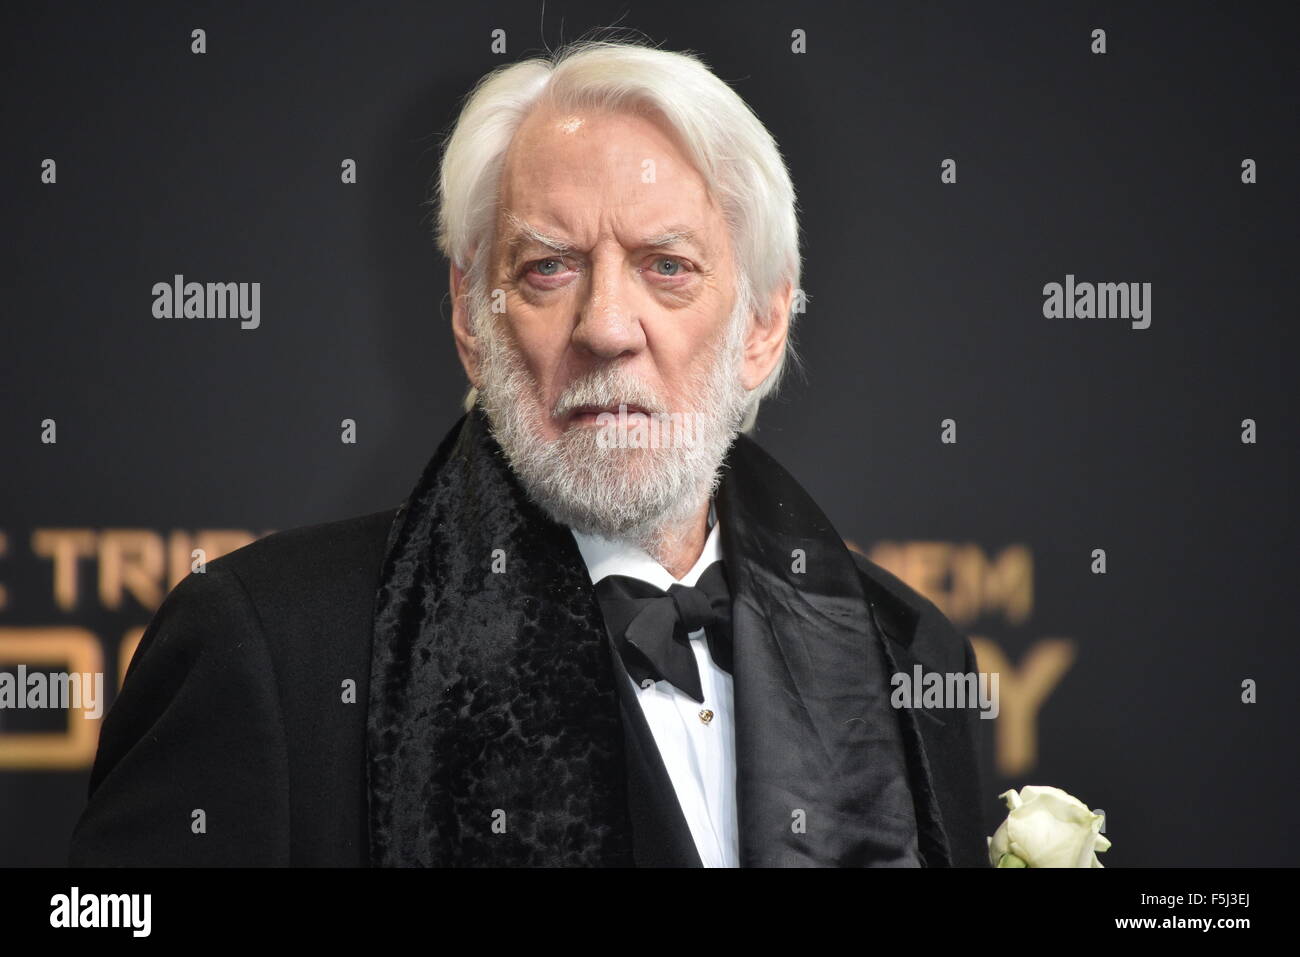 Donald Sutherland attends to the Premiere of 'The Hunger Games: Mockingjay - Part 2' at the Sony Center CineStar in Berlin, Germany. On November 04, 2015./picture alliance Stock Photo